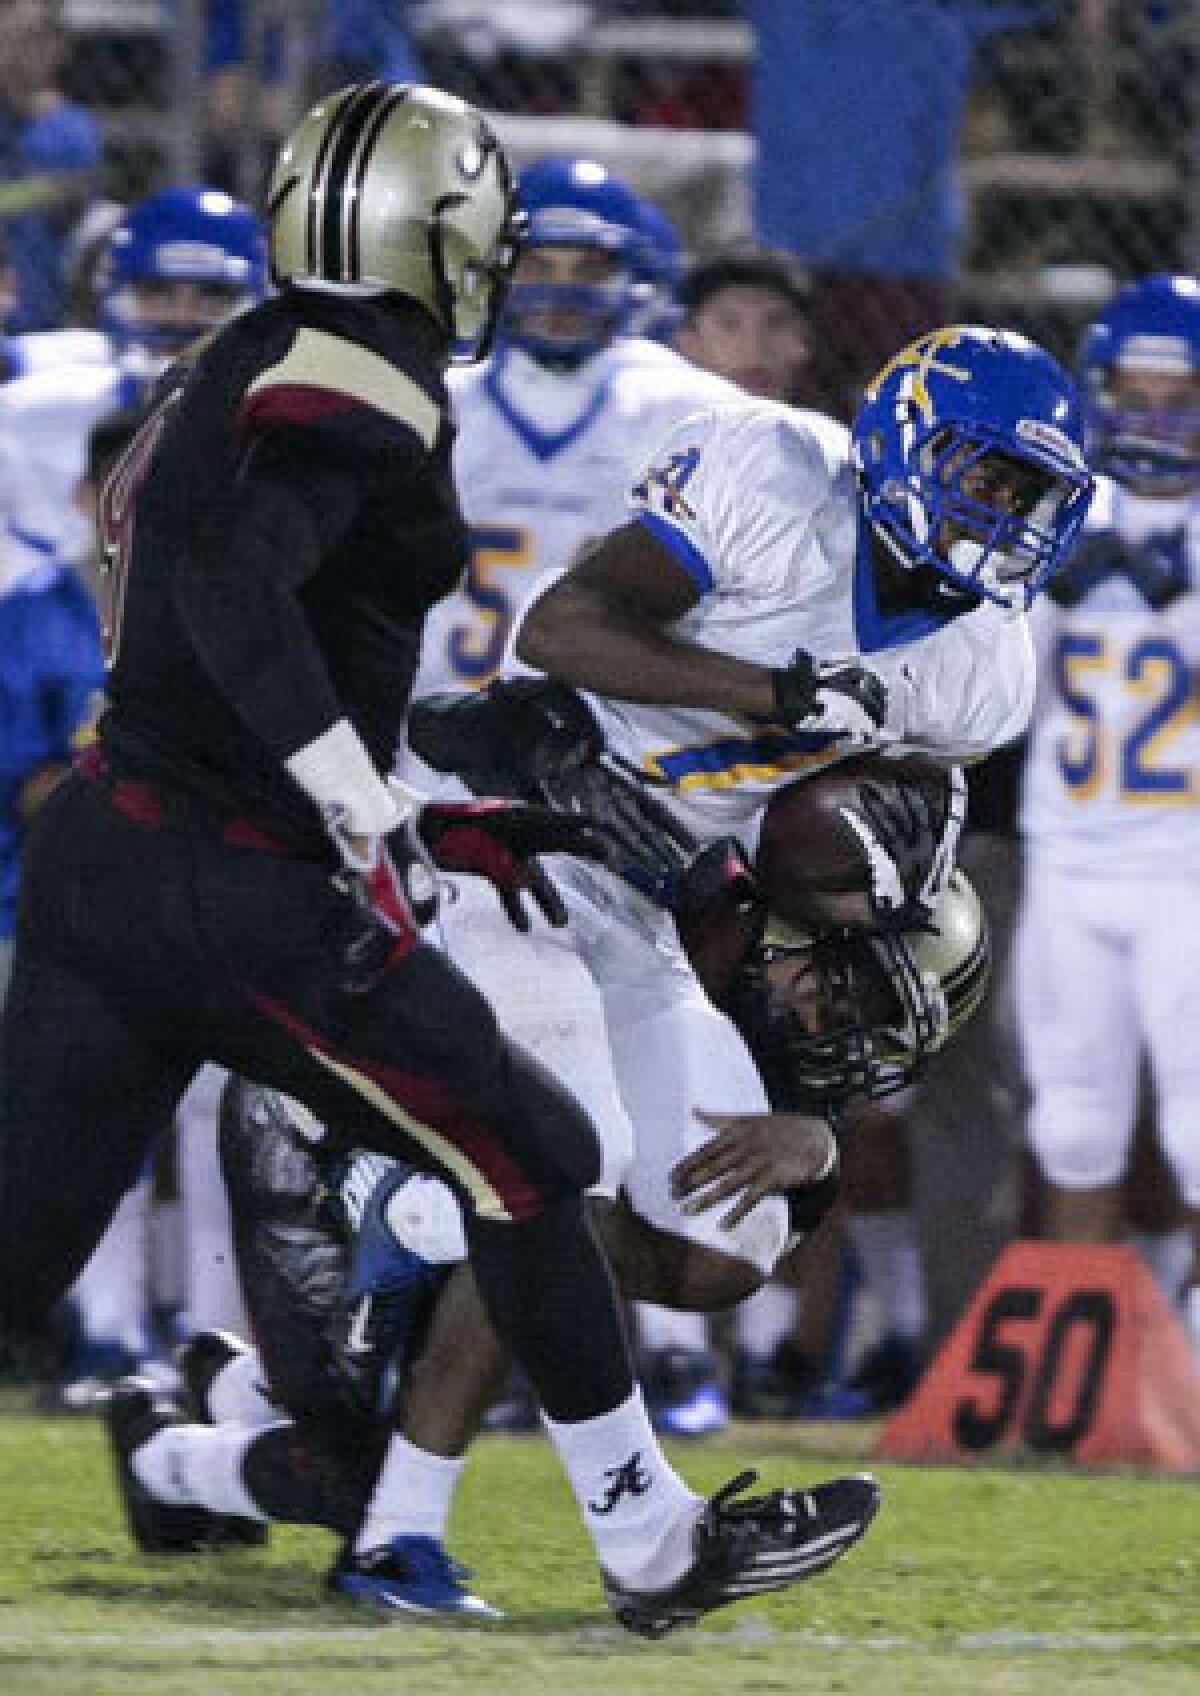 Bishop Amat wide receiver Darren Andrews is dragged down after making a catch against Alemany on Oct. 12.